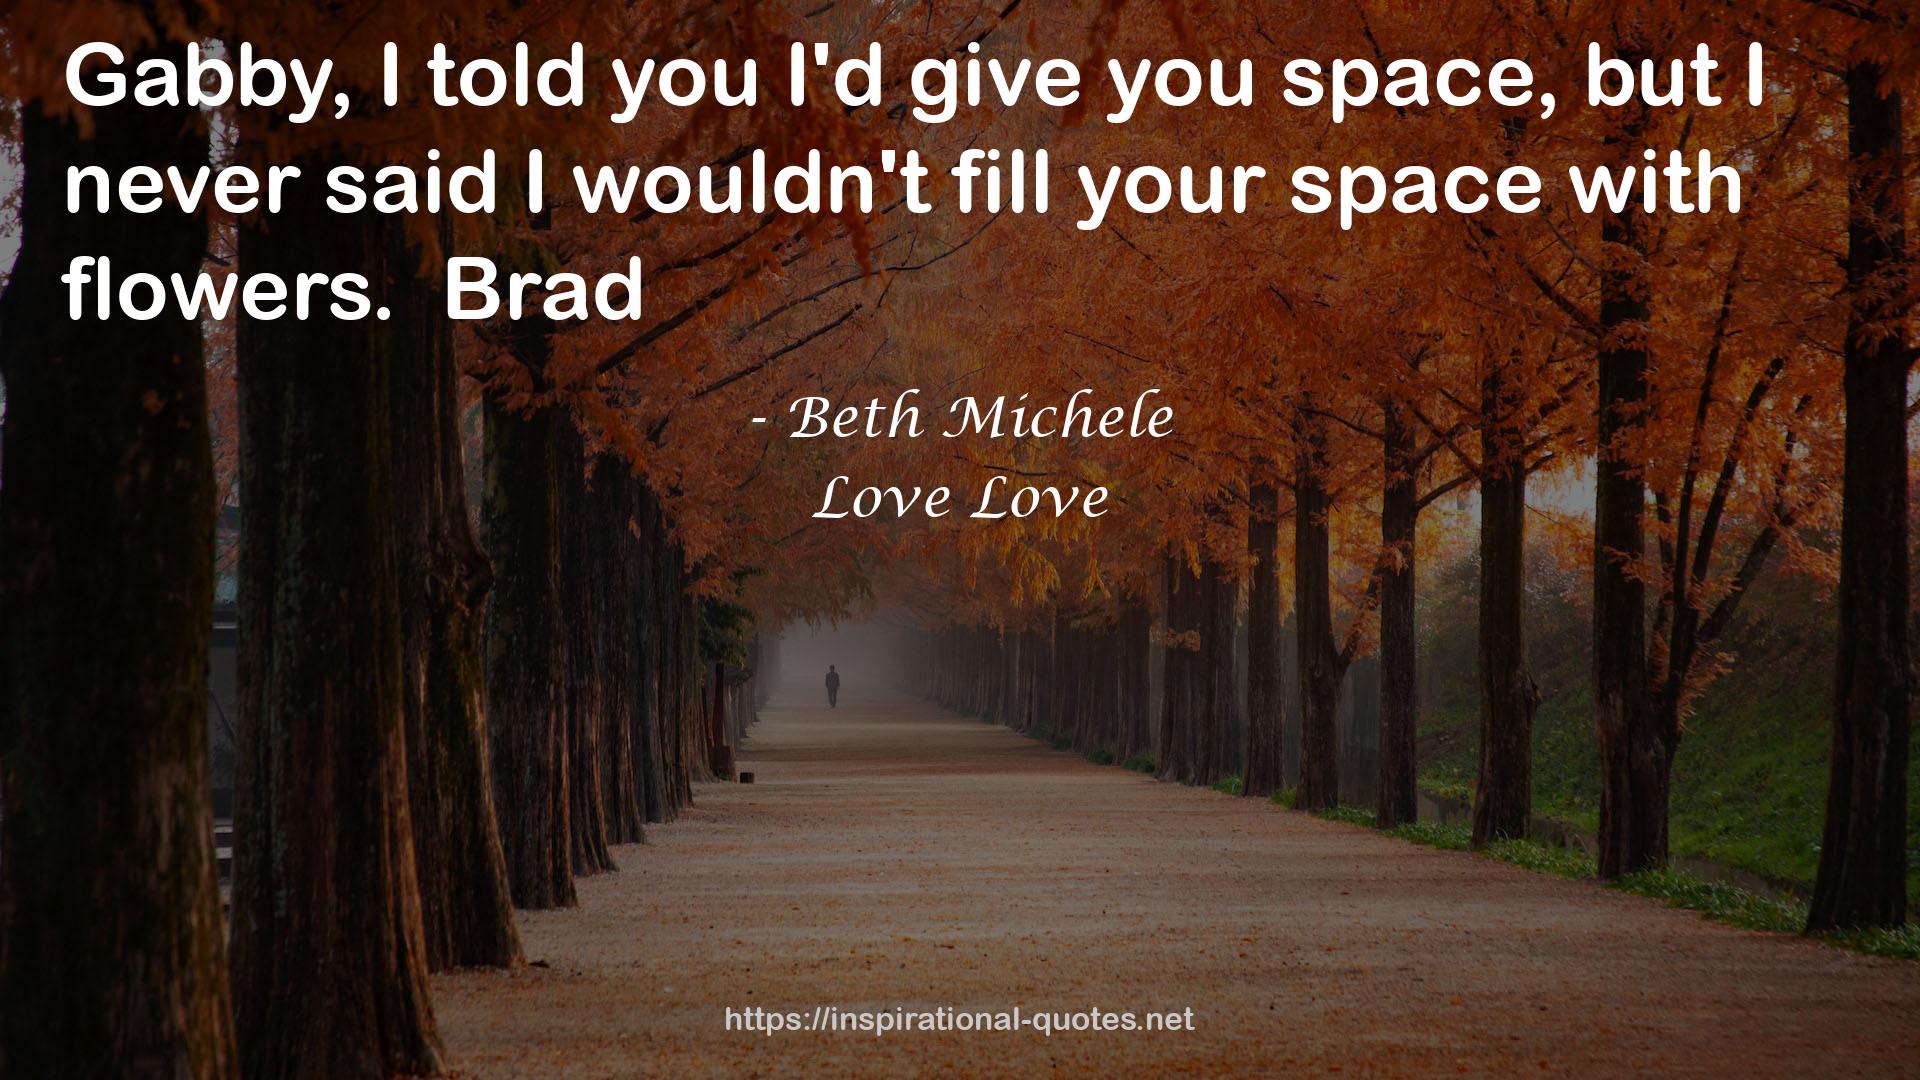 Beth Michele QUOTES